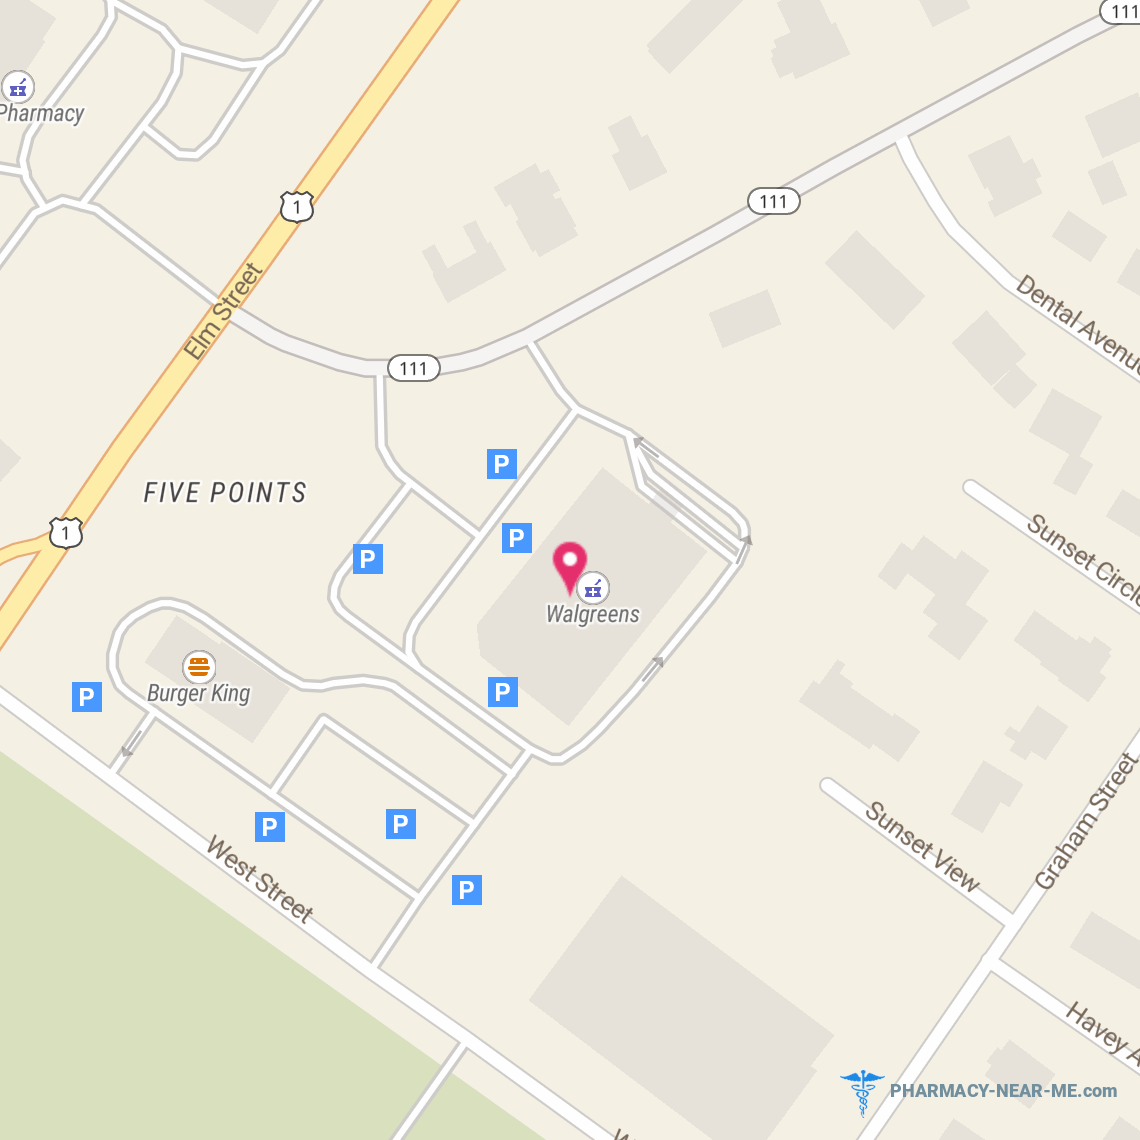 WALGREENS #18409 - Pharmacy Hours, Phone, Reviews & Information: 335 Alfred Street, Biddeford, Maine 04005, United States